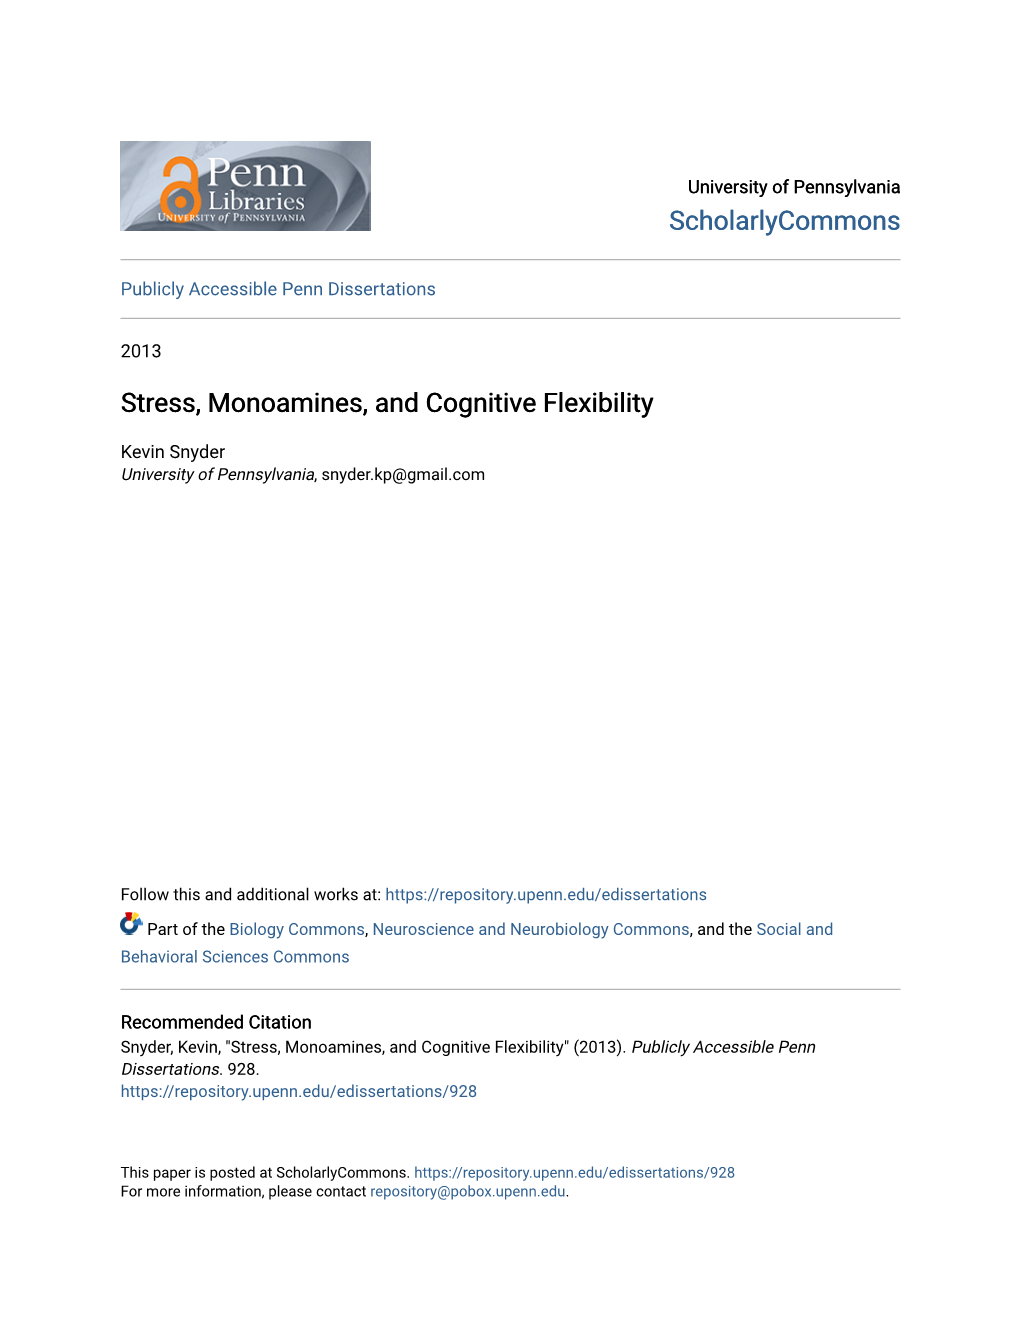 Stress, Monoamines, and Cognitive Flexibility